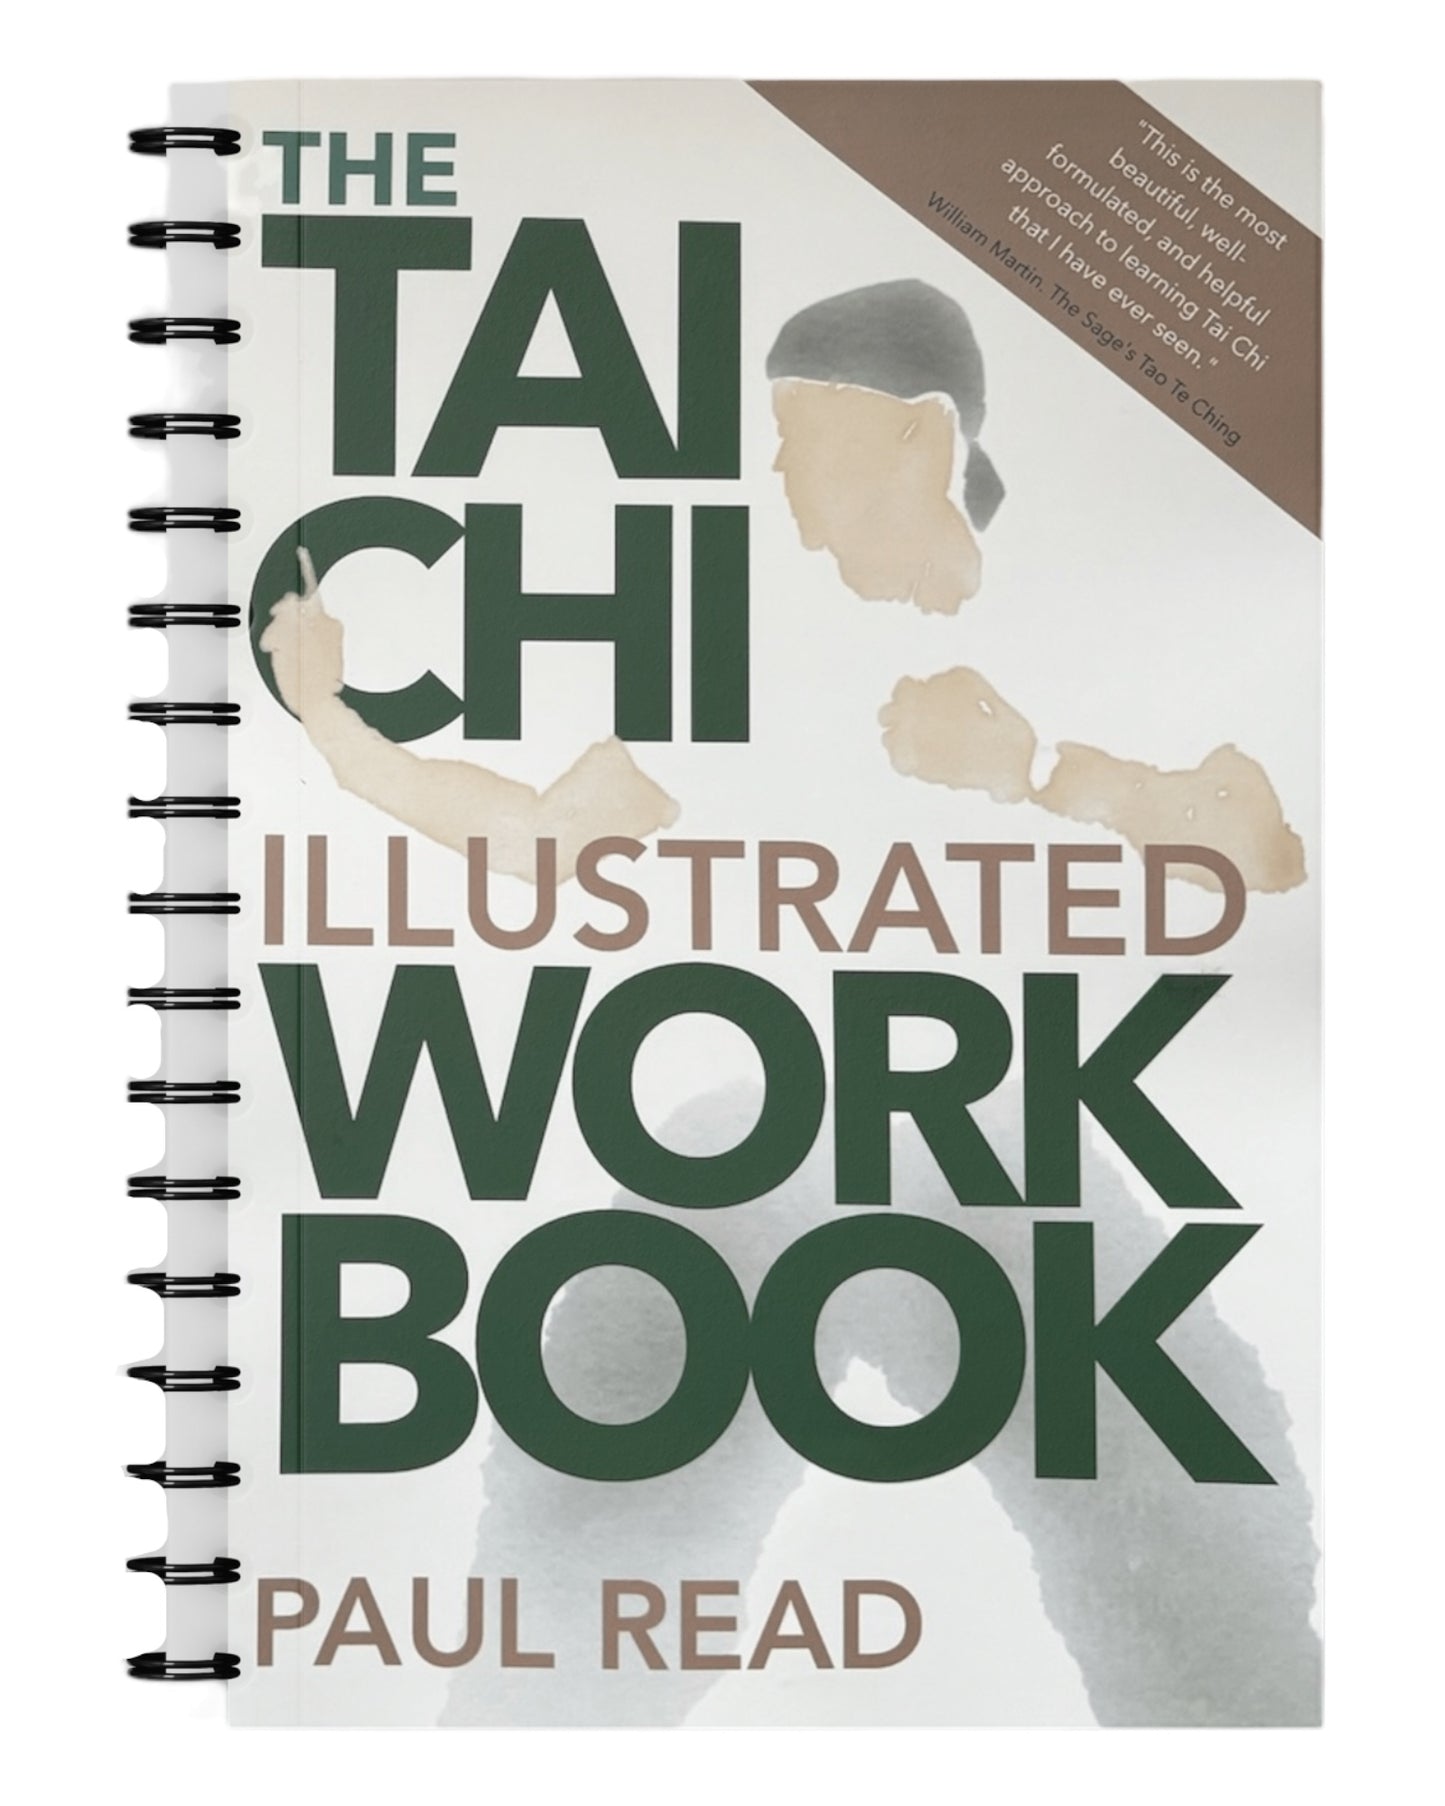 Wire bound cover of book showing title and tai chi water colour posture